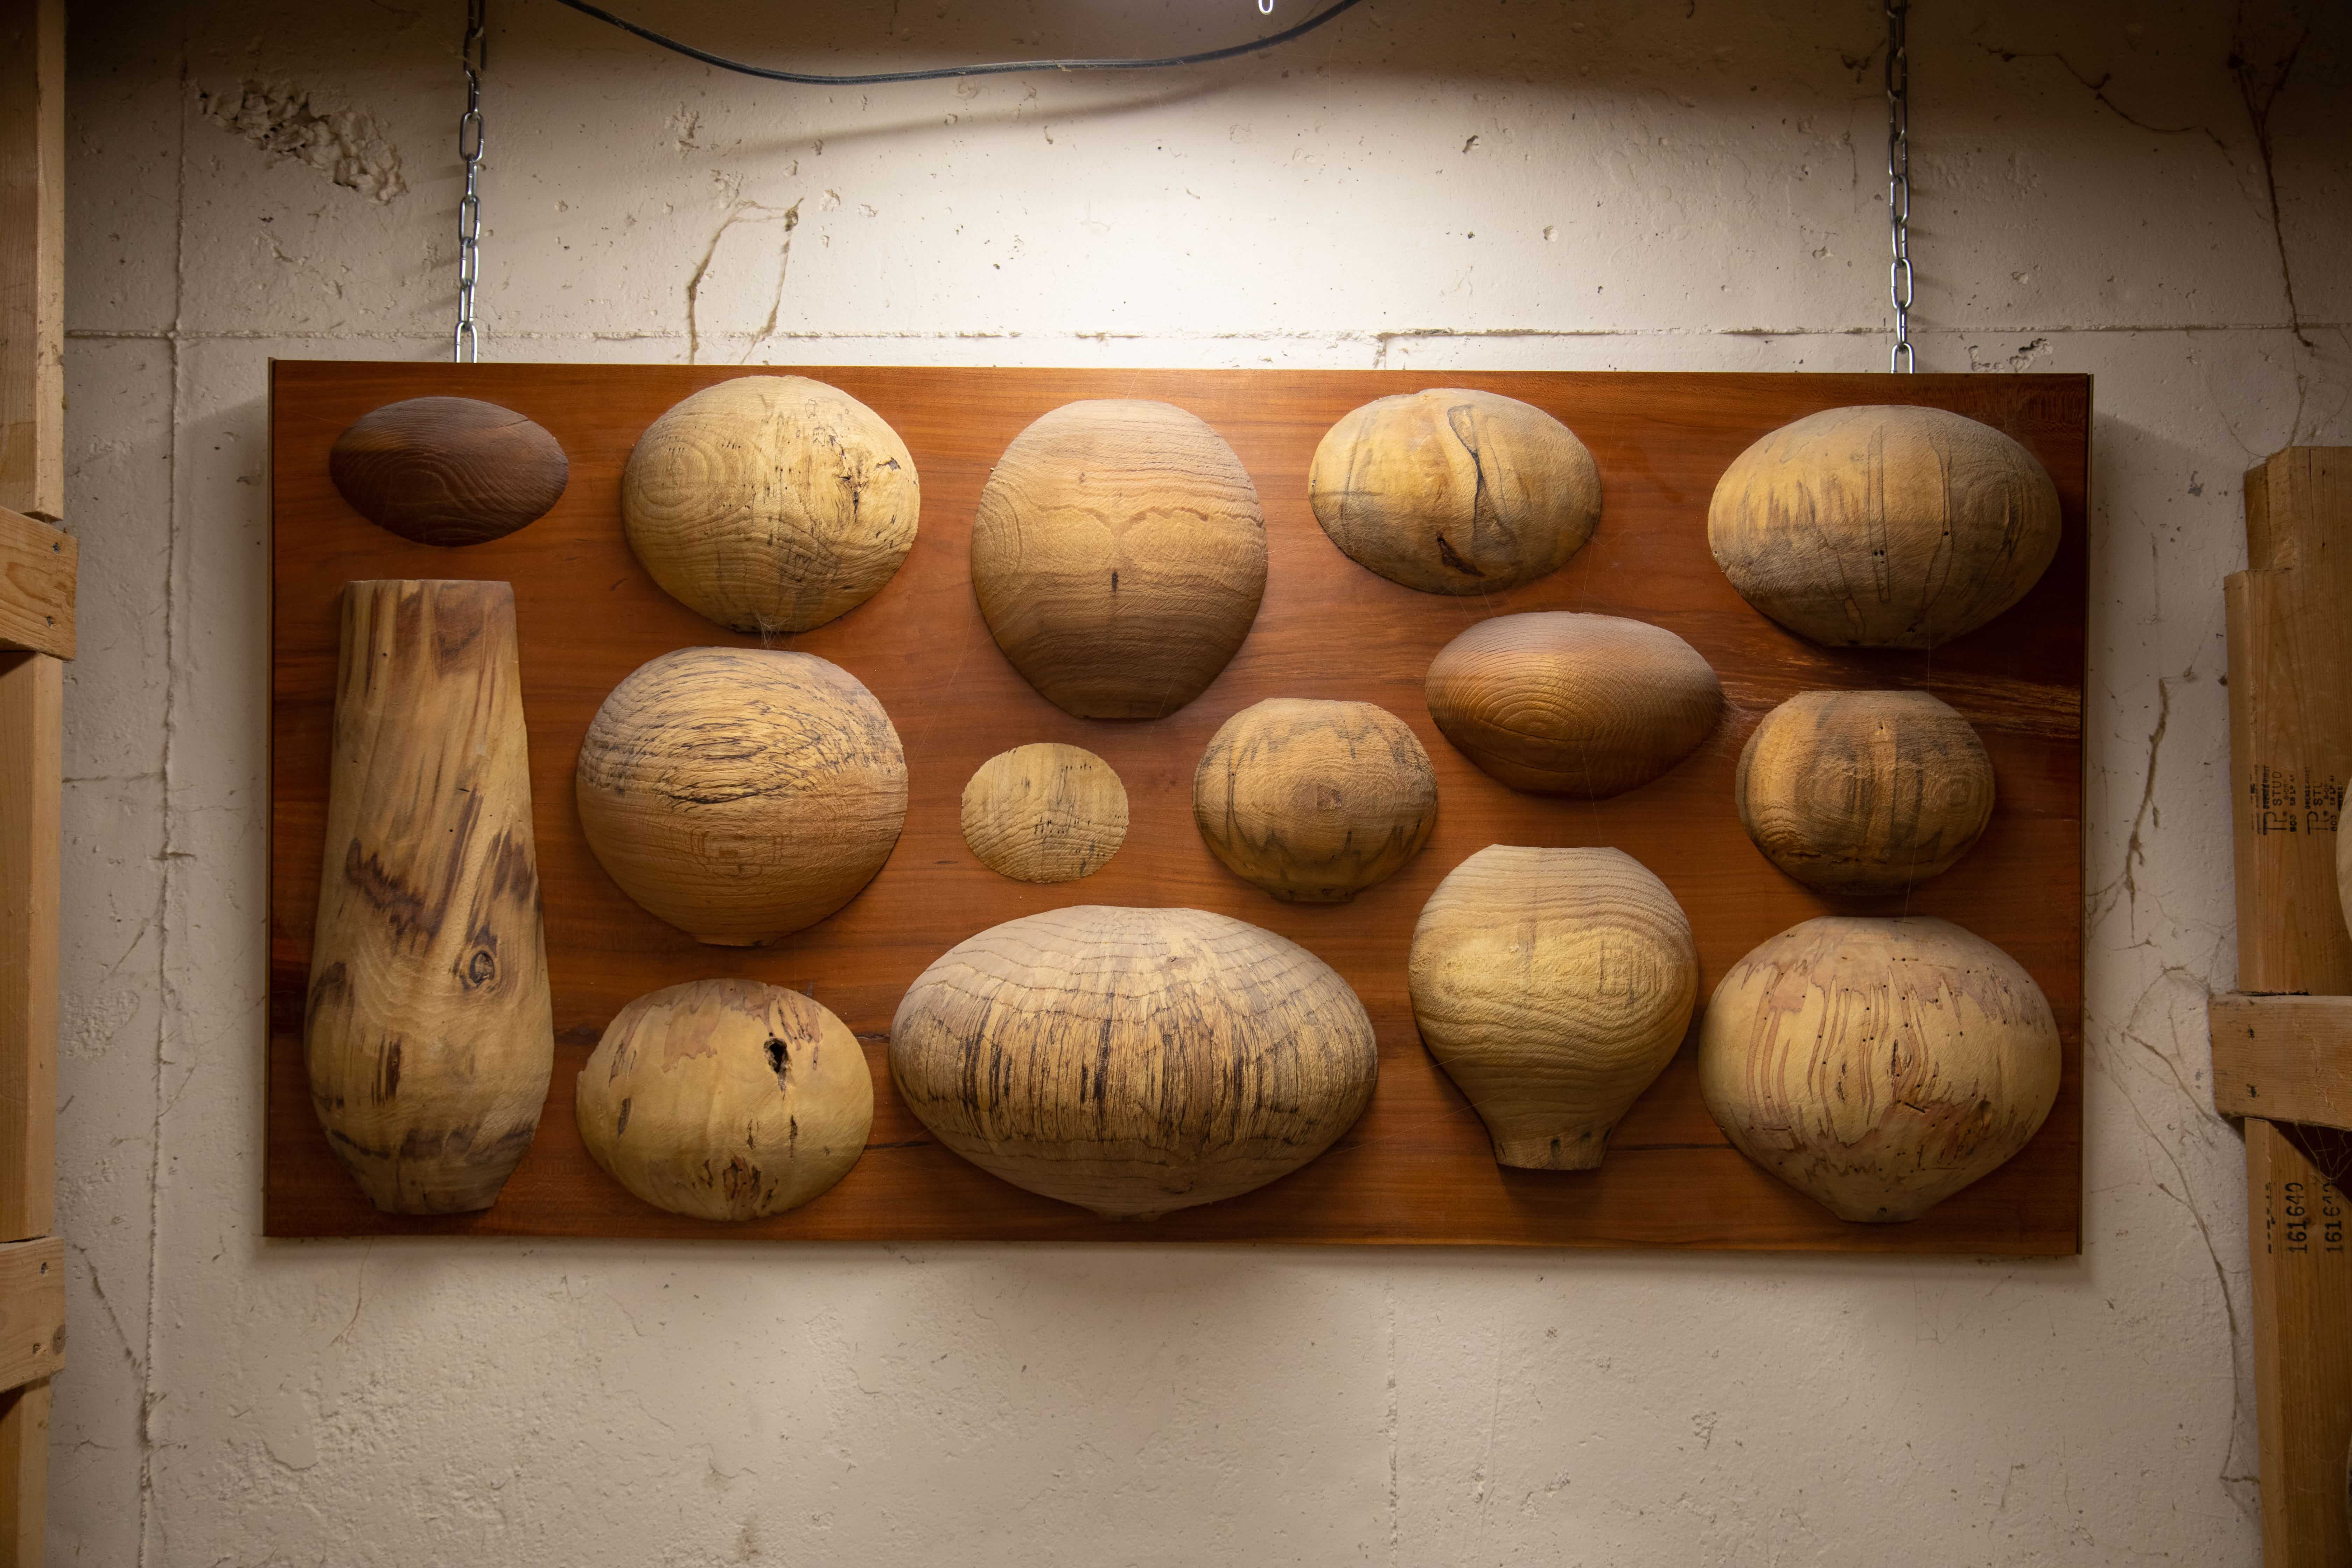 Philip Moultrop's wood bowl collage art hanging on a wall.